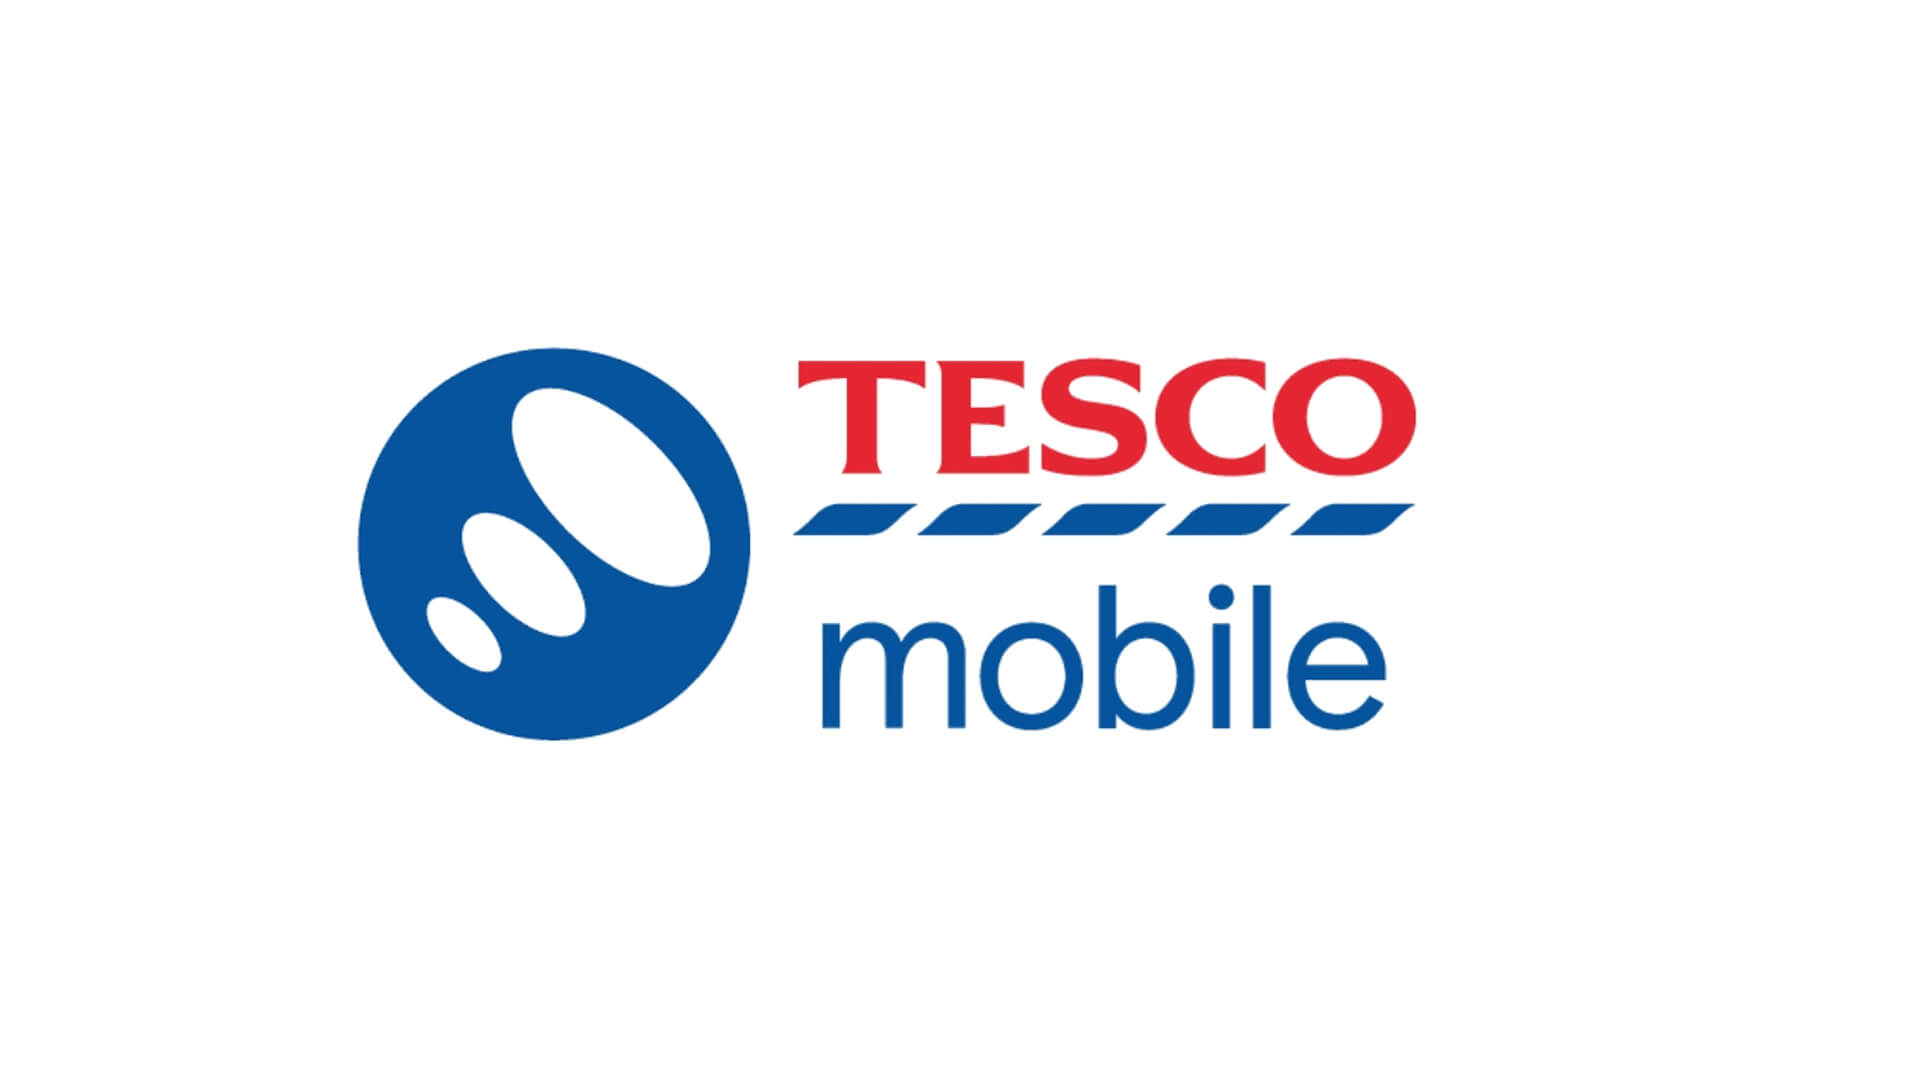 Tesco Mobile Reveals New Brand Identity - Acquisition